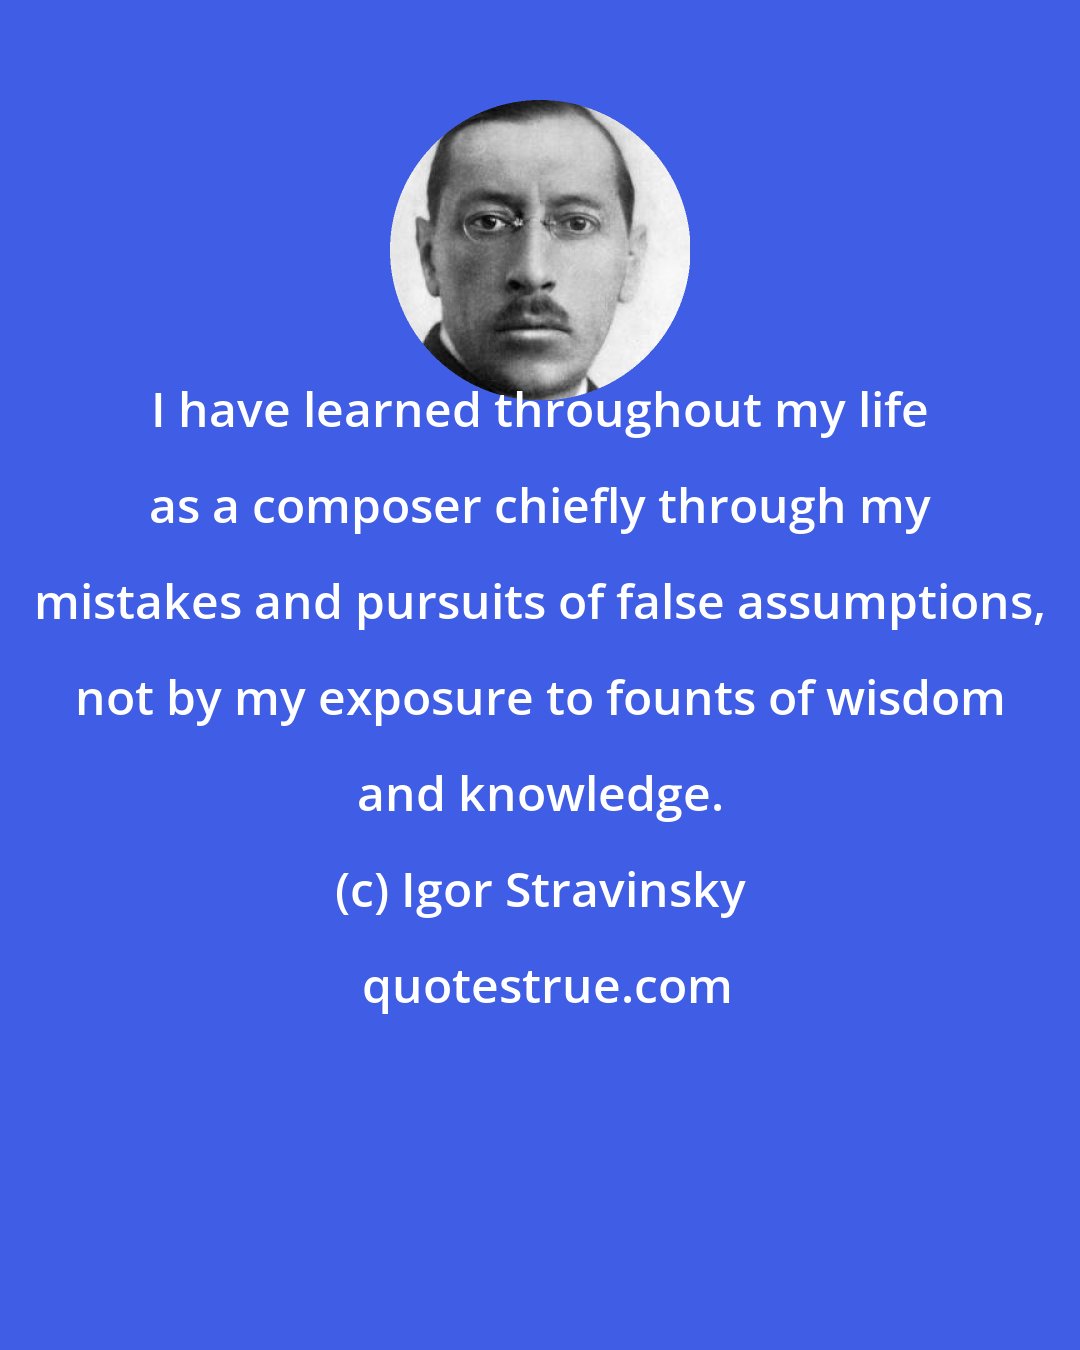 Igor Stravinsky: I have learned throughout my life as a composer chiefly through my mistakes and pursuits of false assumptions, not by my exposure to founts of wisdom and knowledge.